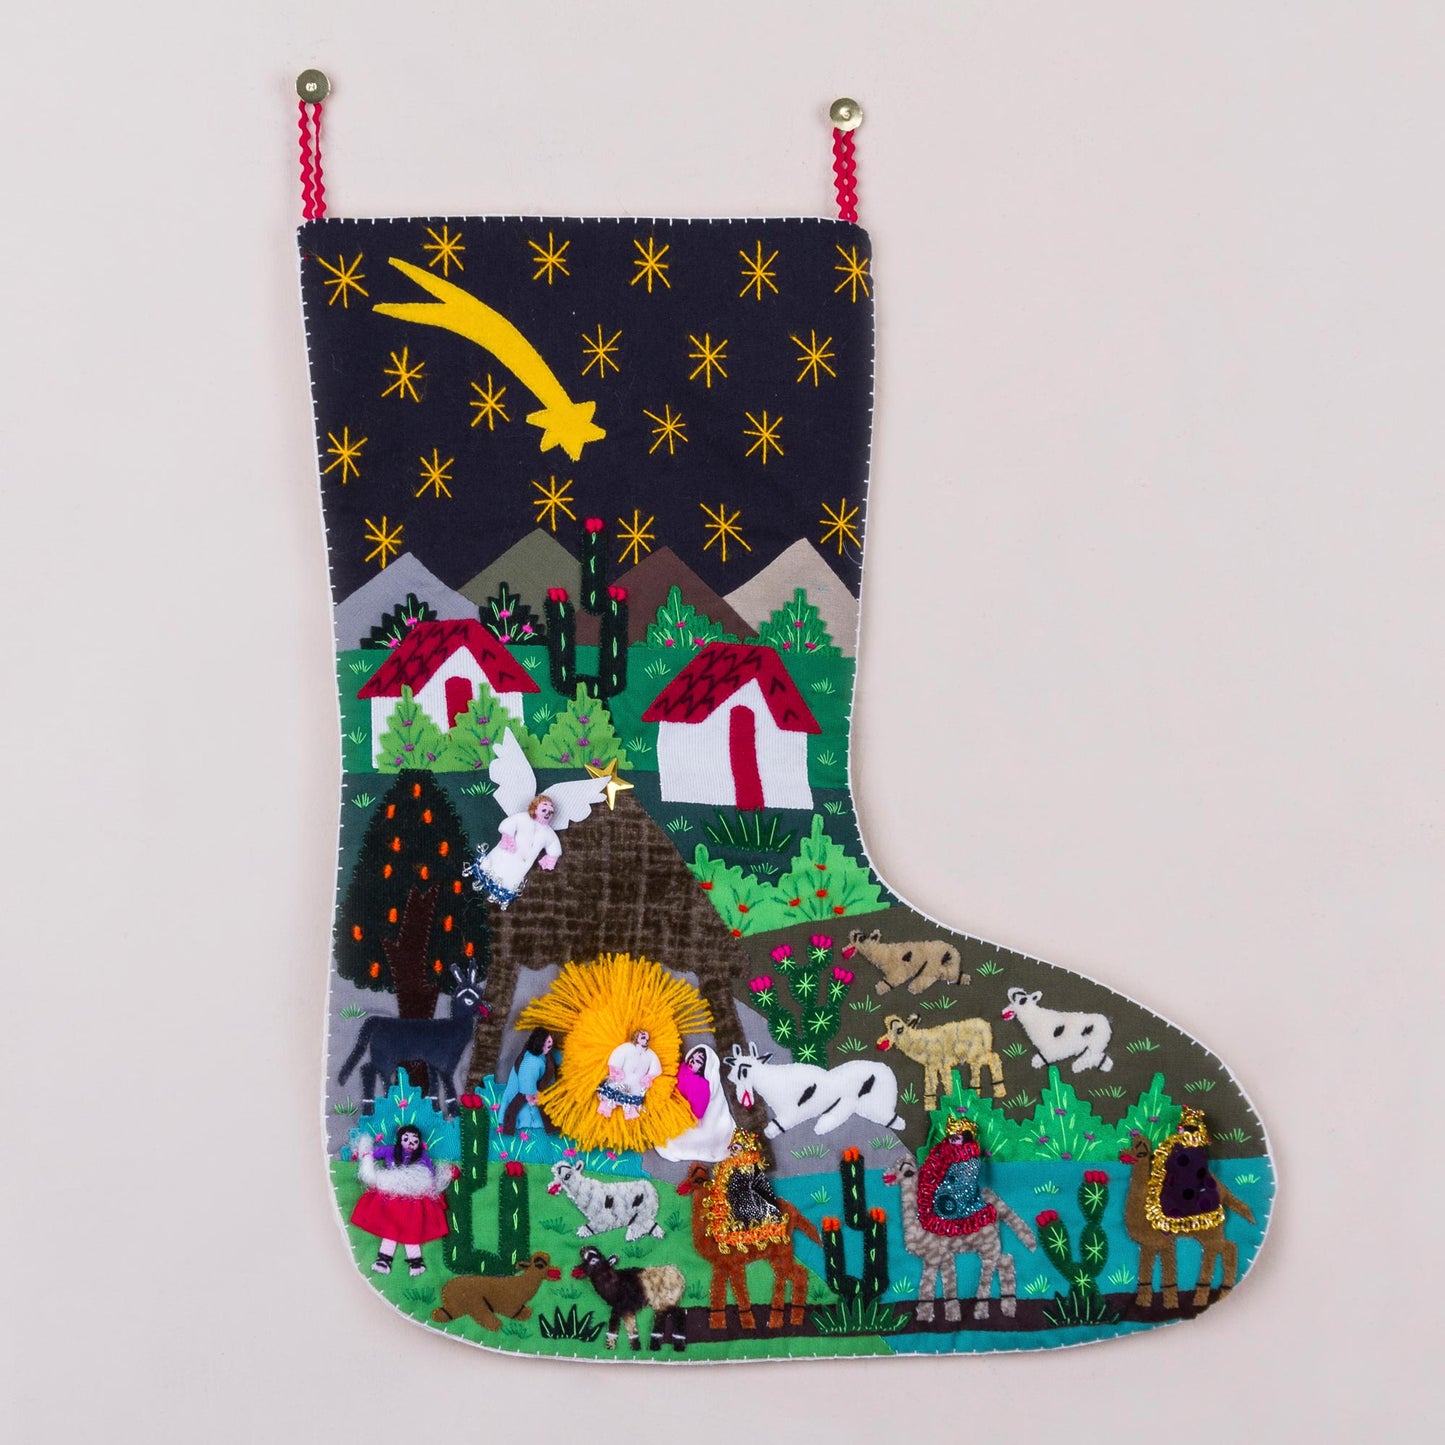 Village Nativity Handcrafted Andean Applique Christmas Stocking